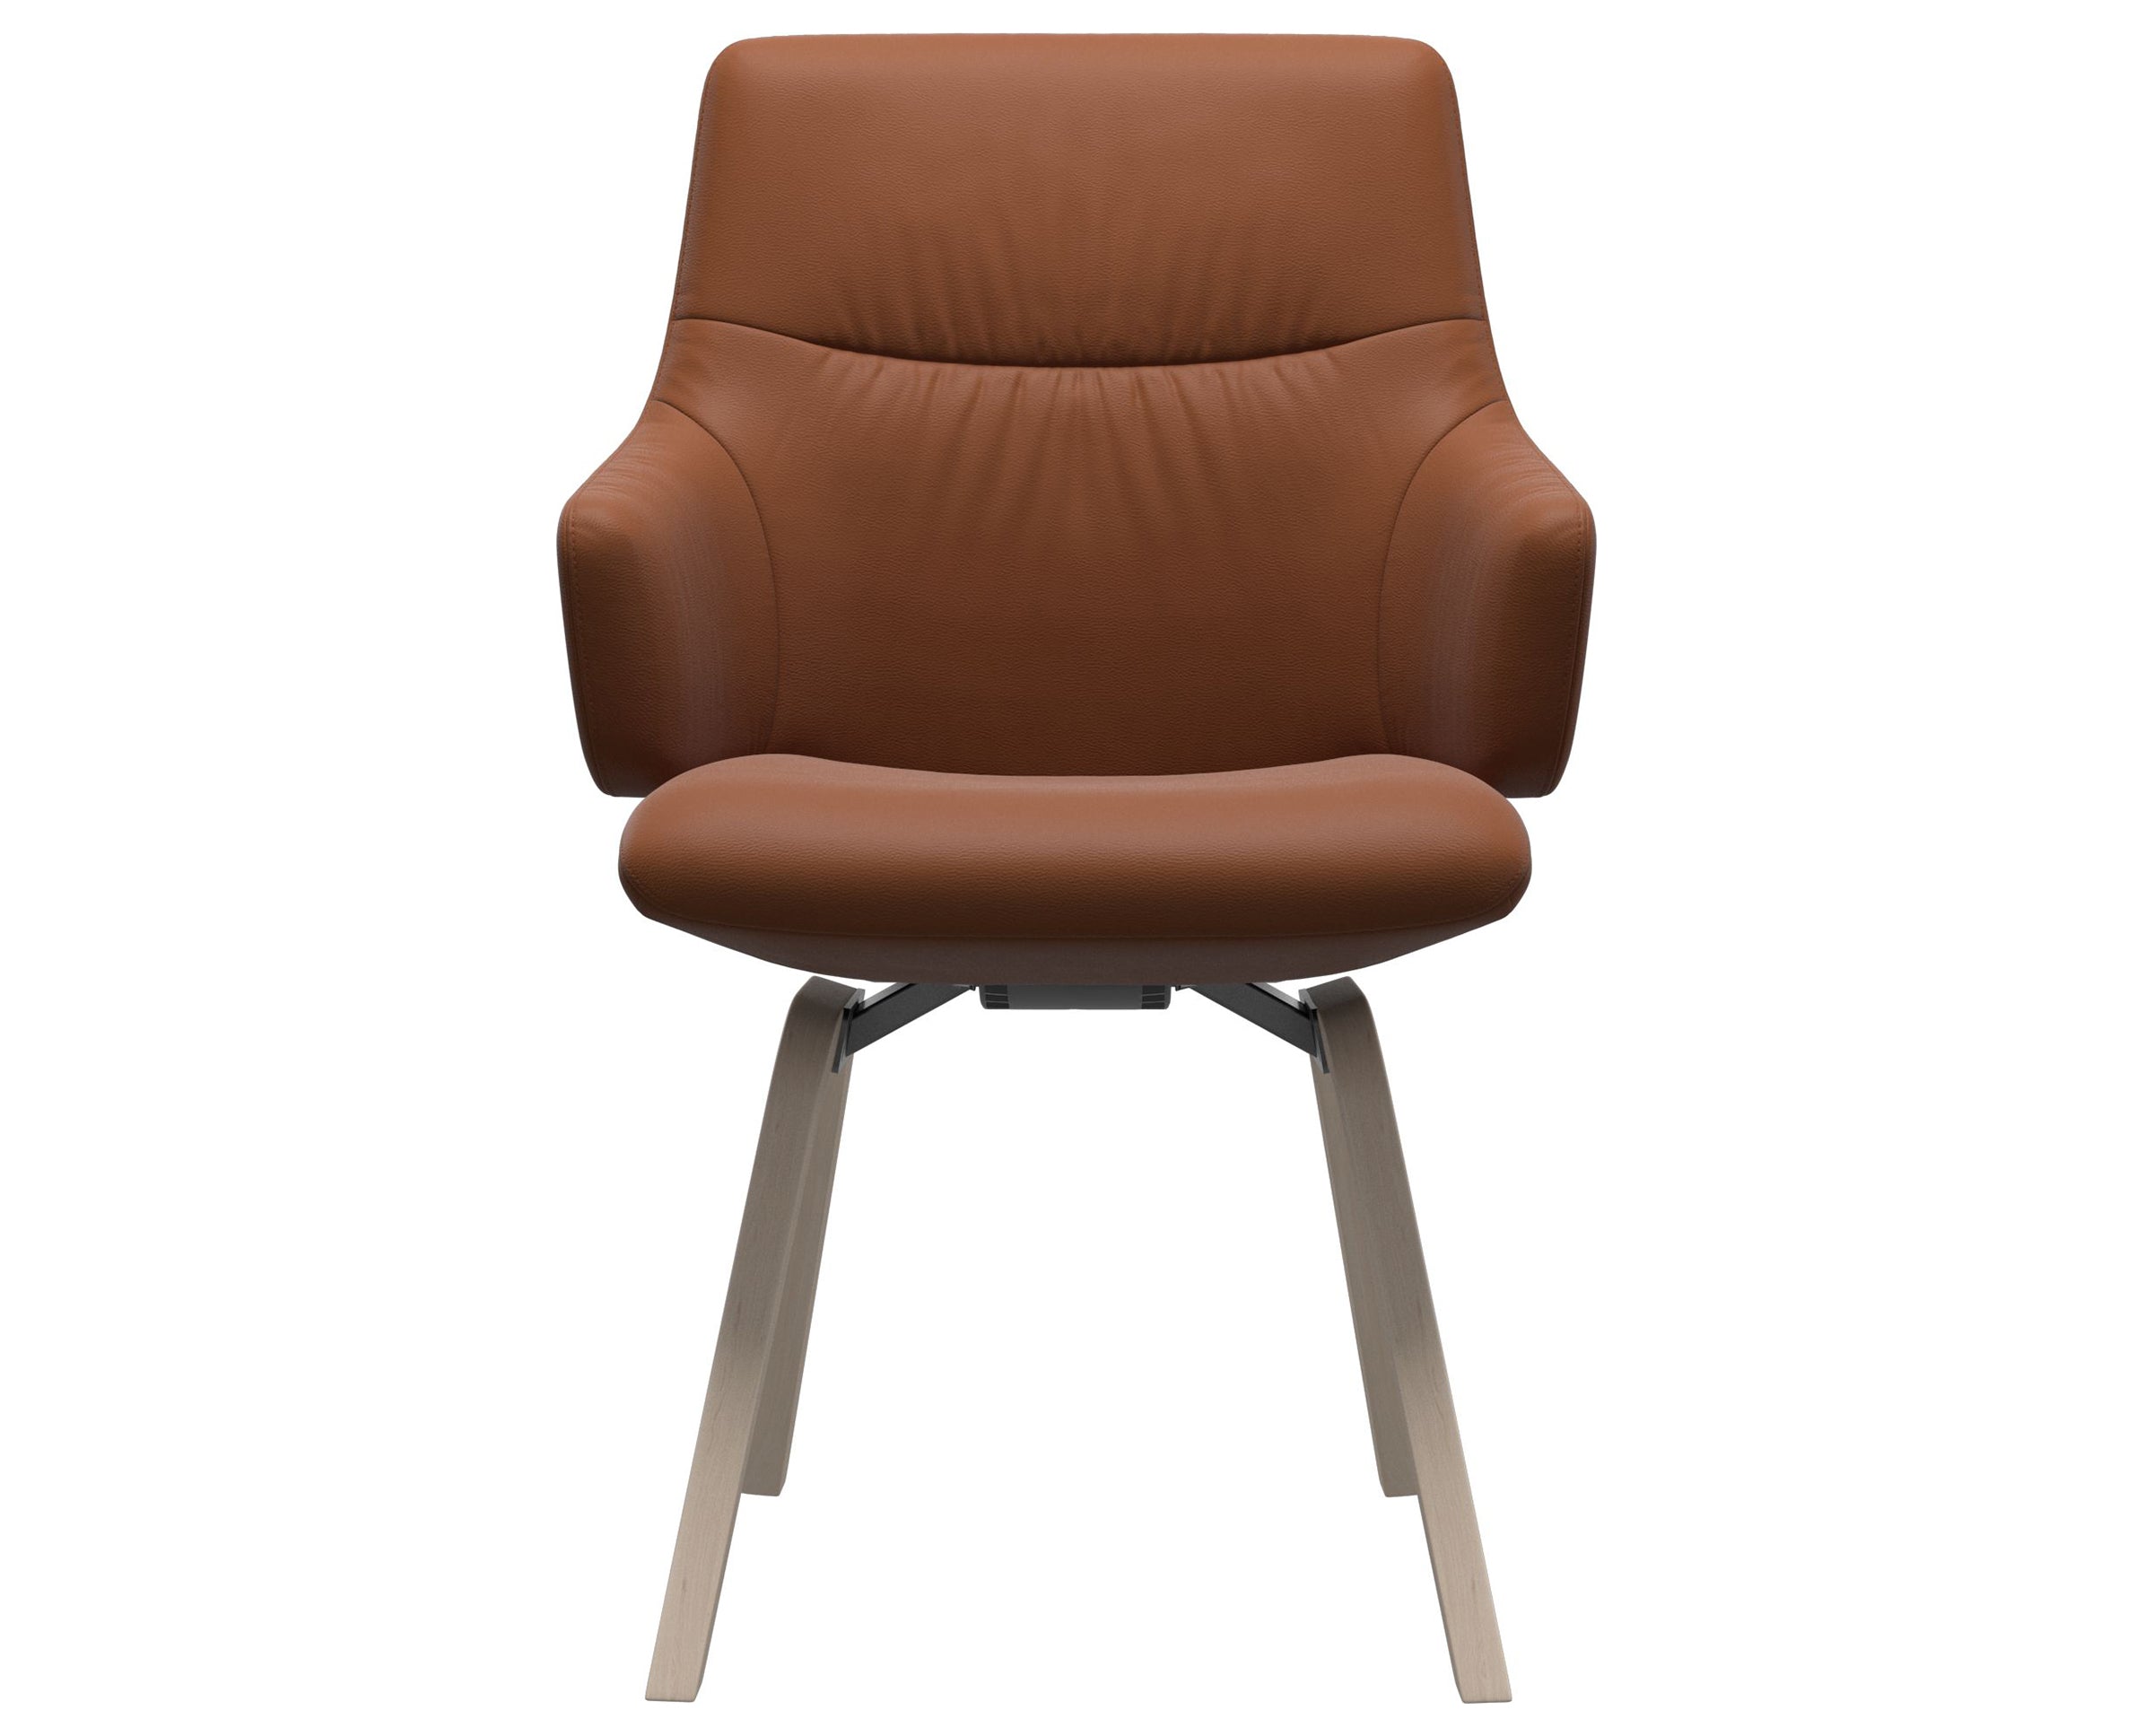 Paloma Leather New Cognac and Whitewash Base | Stressless Mint Low Back D200 Dining Chair w/Arms | Valley Ridge Furniture